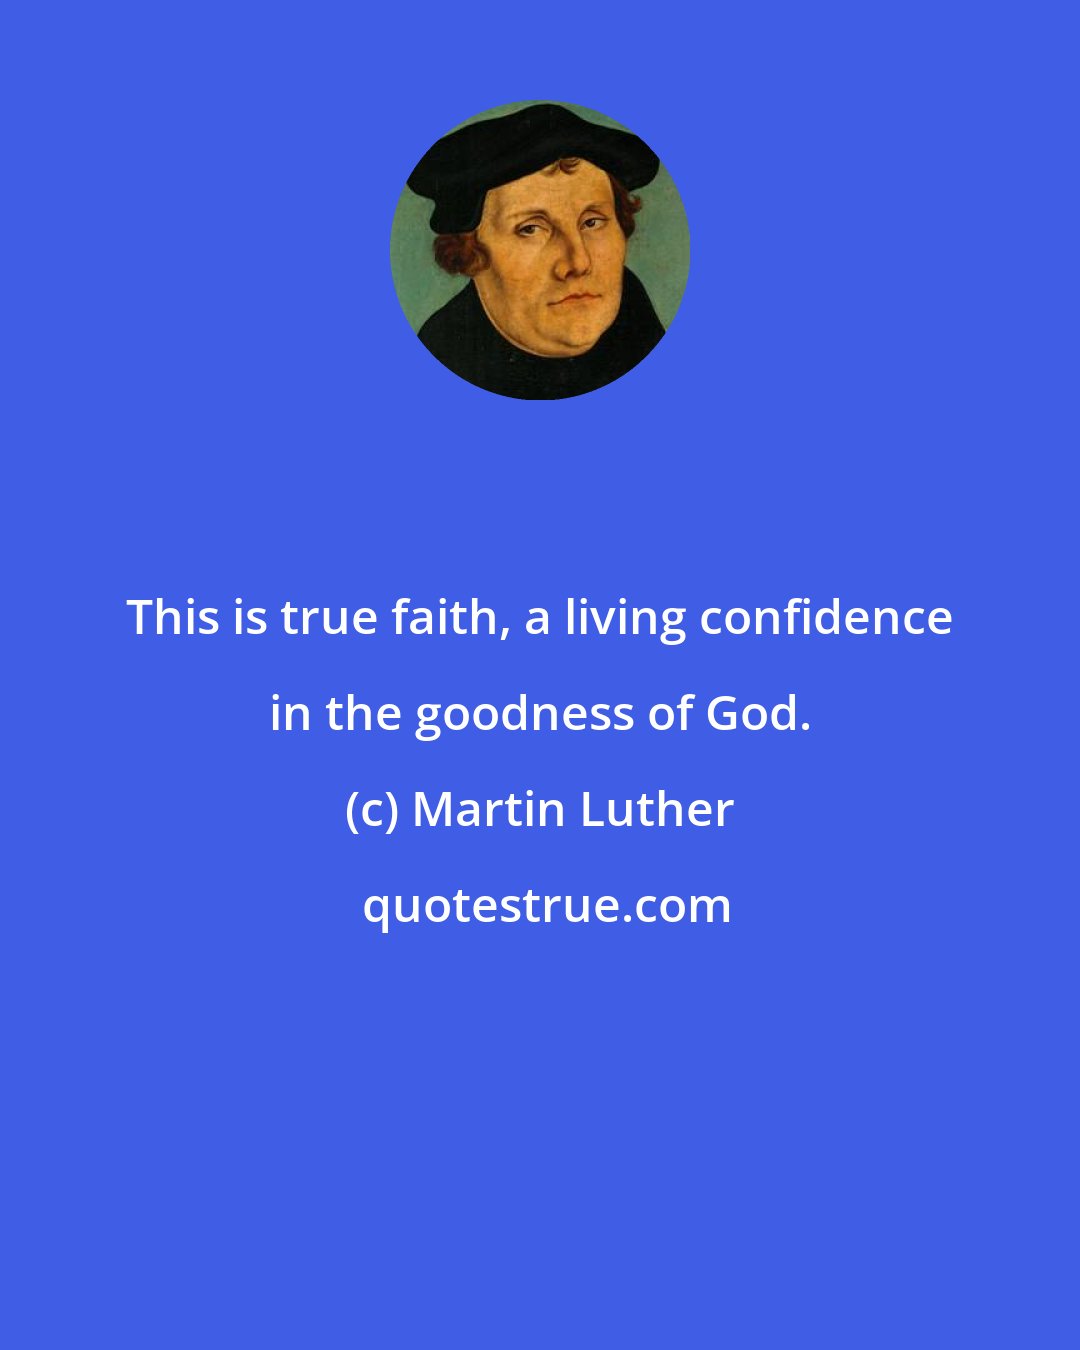 Martin Luther: This is true faith, a living confidence in the goodness of God.